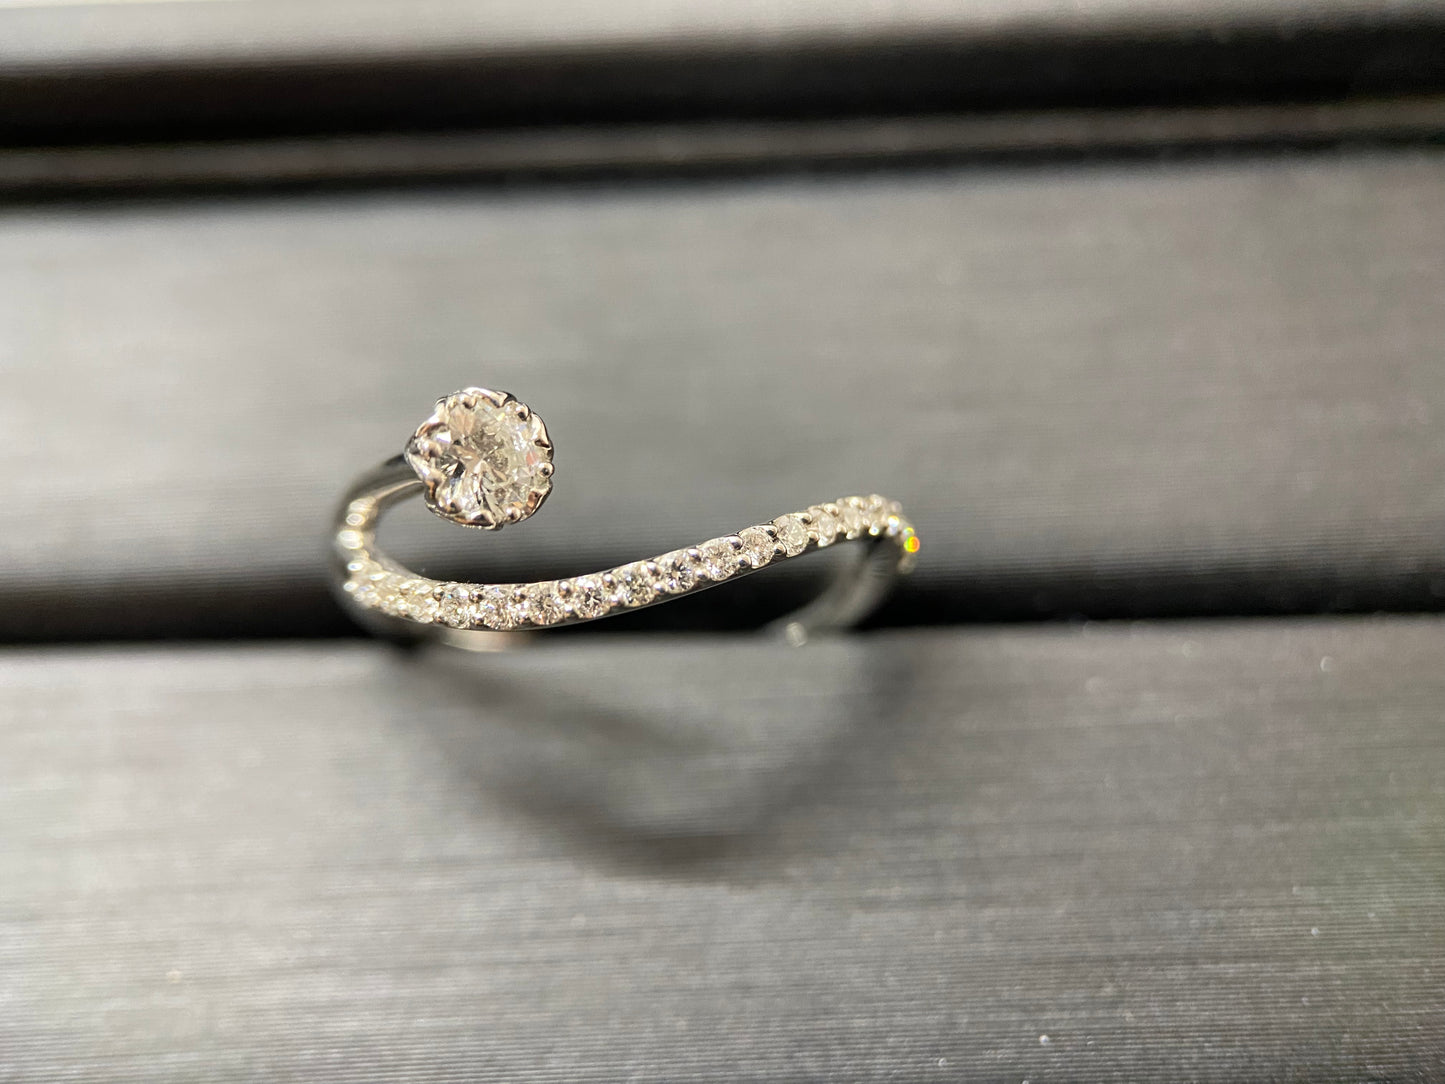 New] Diamond jewelry ring decorated with soon-to-be-blooming buds